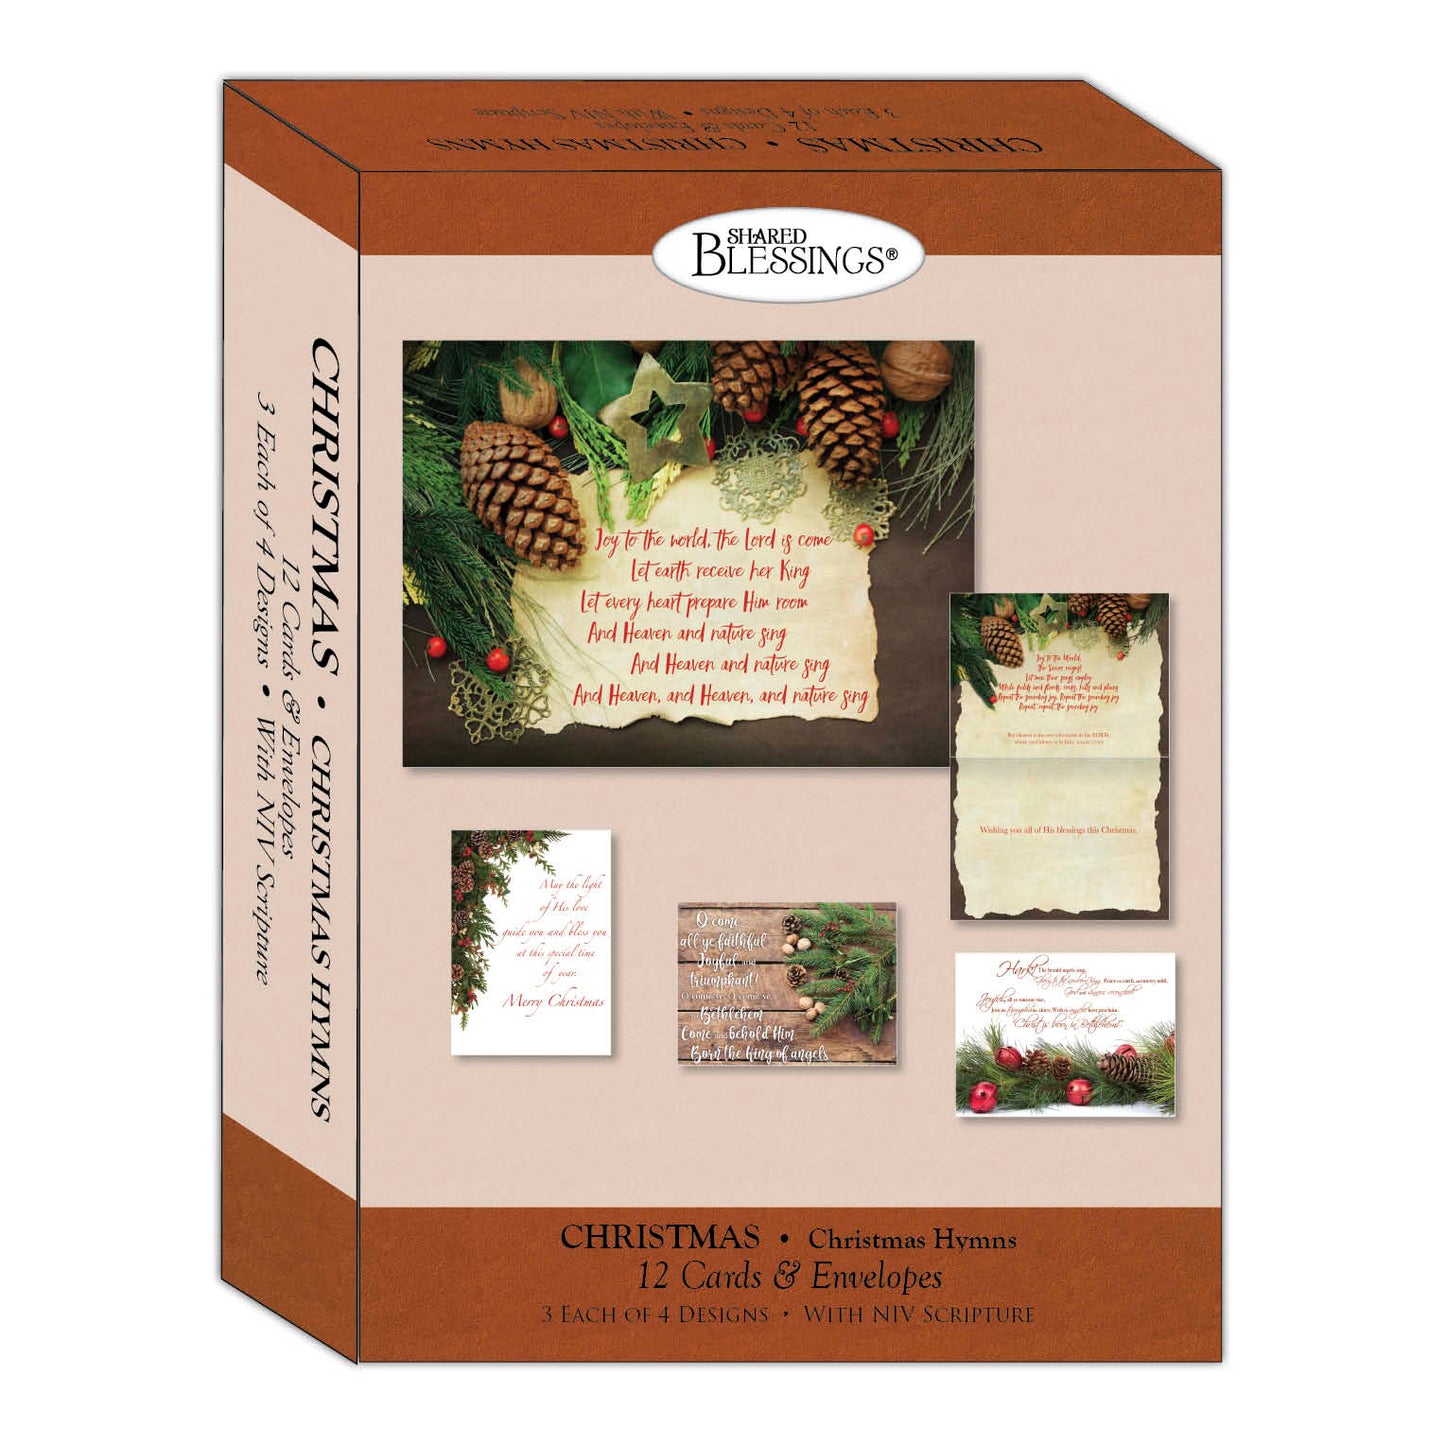 Boxed Christmas Card Assortment - Christmas Hymns, 12 NIV Cards and Envelopes